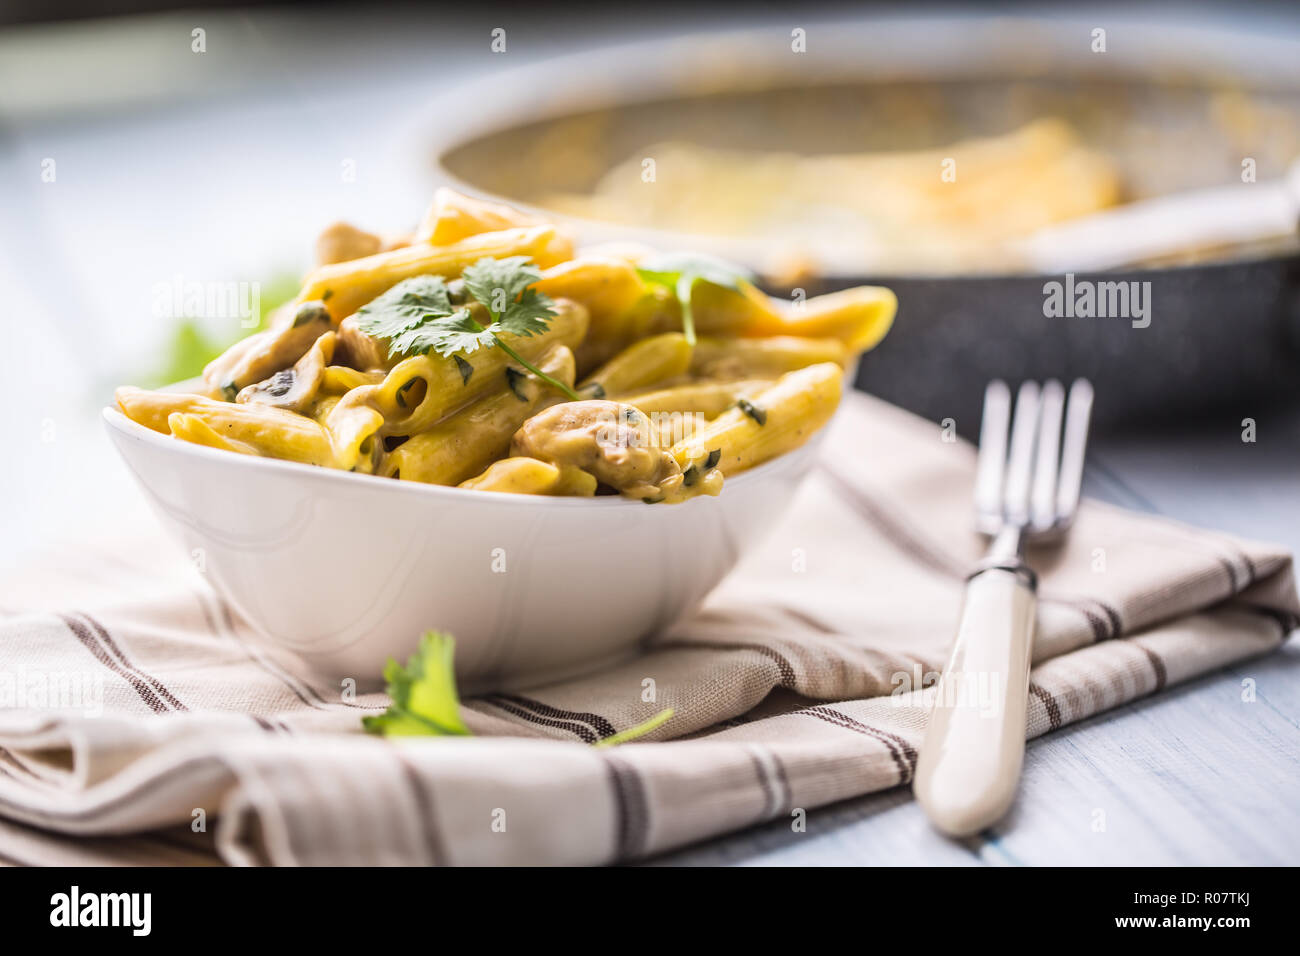 Pasta pene with chicken pieces mushrooms parmesan cheese sauce and herb decoration. Pene con pollo - Italian or medierranean cuisine. Stock Photo